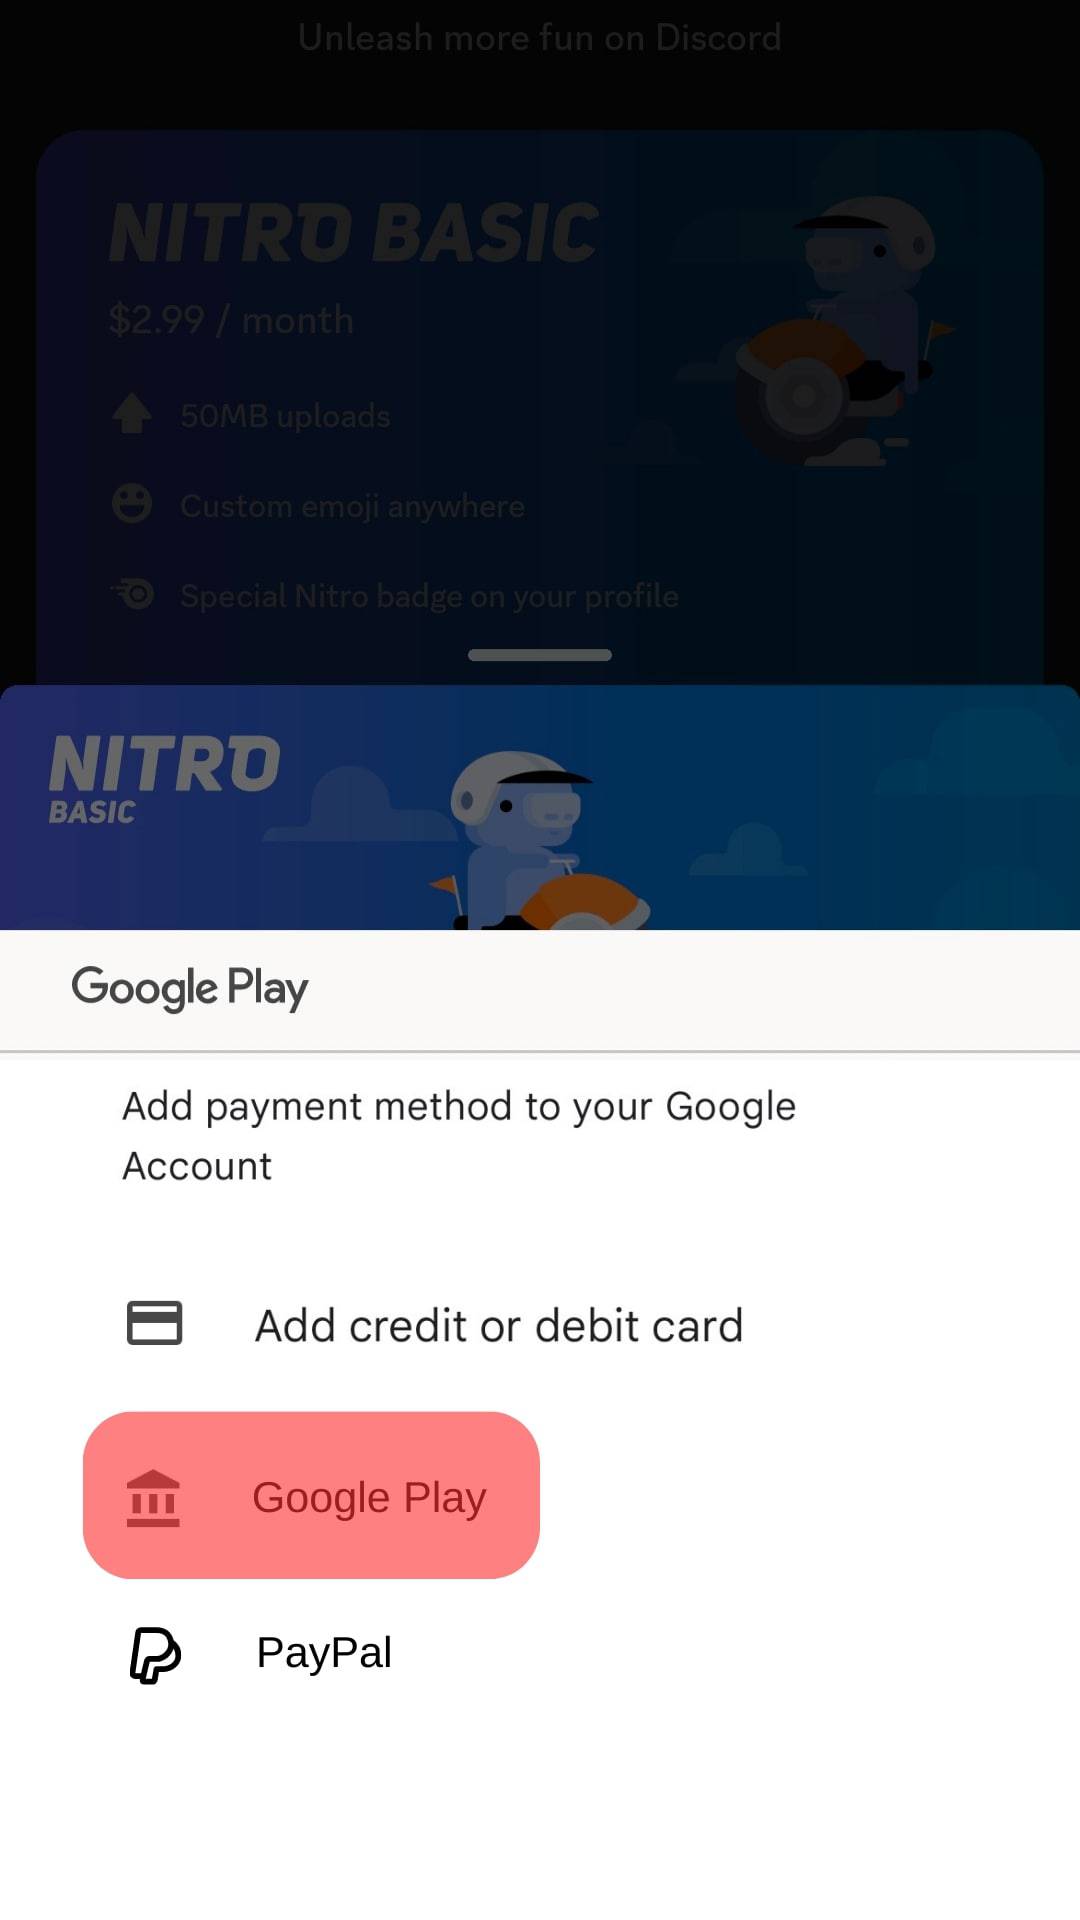 Click The Google Play Option